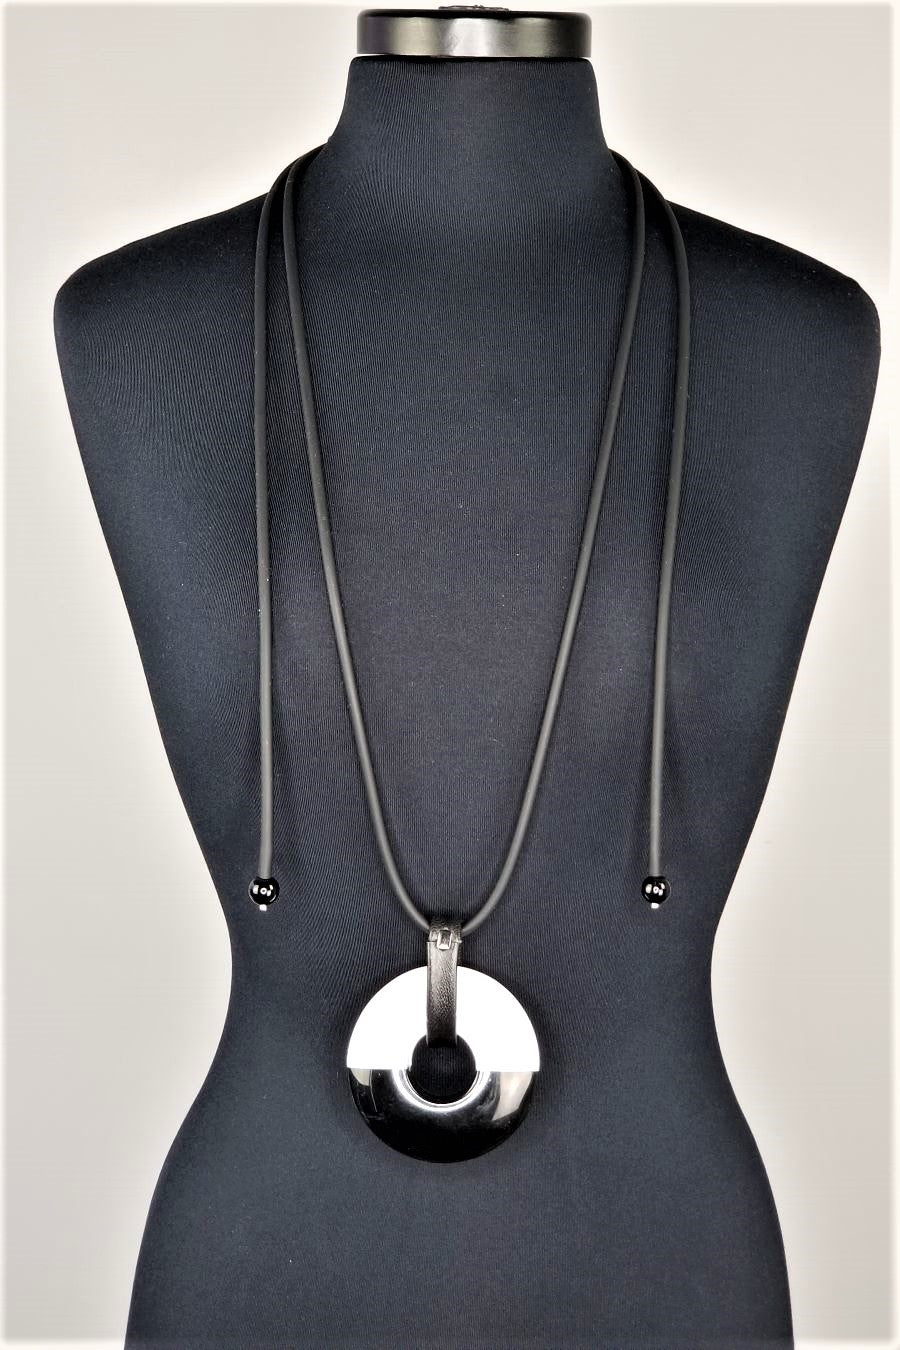 NKL456 Acadia Convertible Necklace